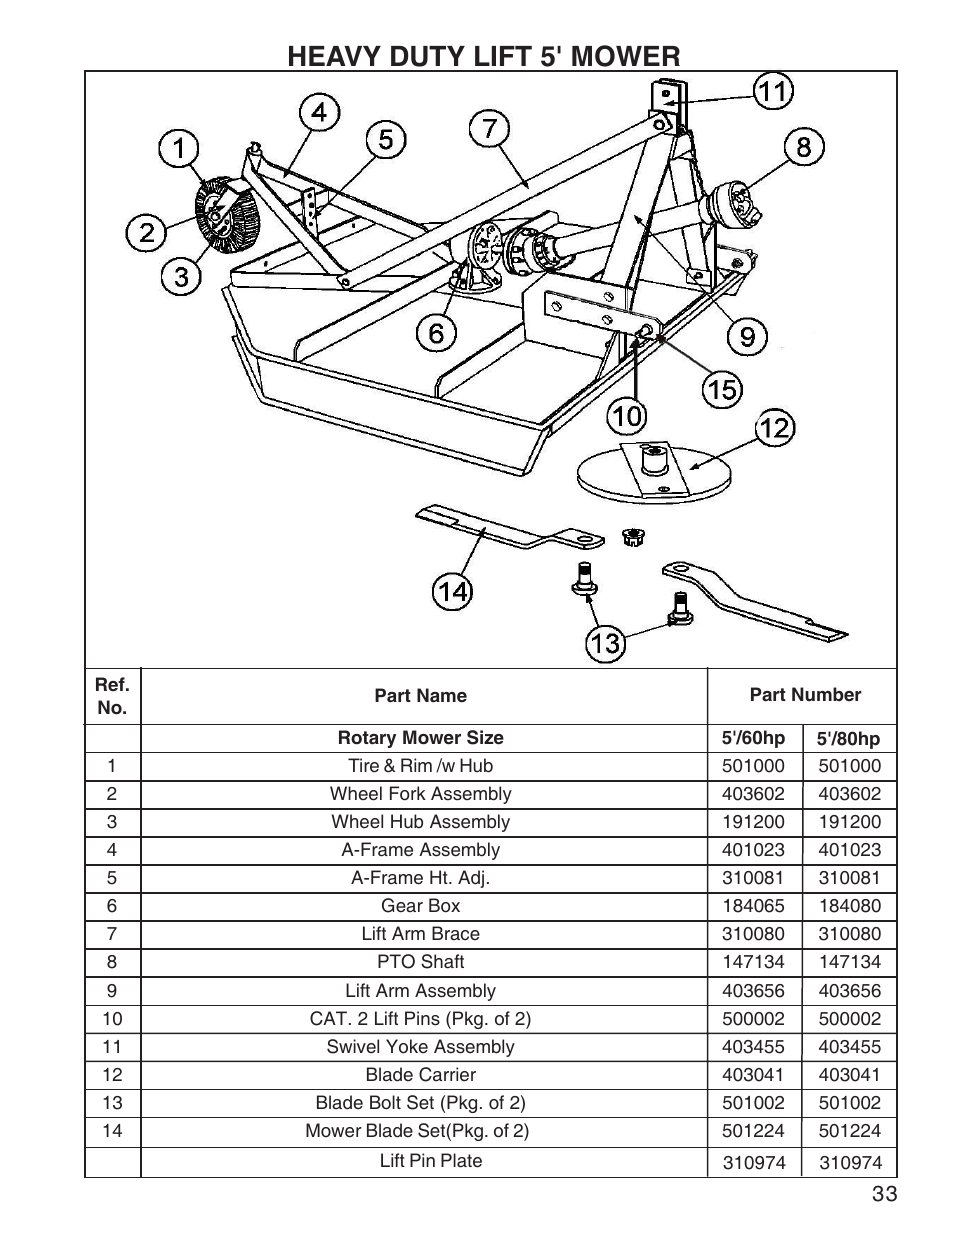 Heavy duty lift 5' mower | King Kutter Rotary Mower User Manual | Page 33 / 46